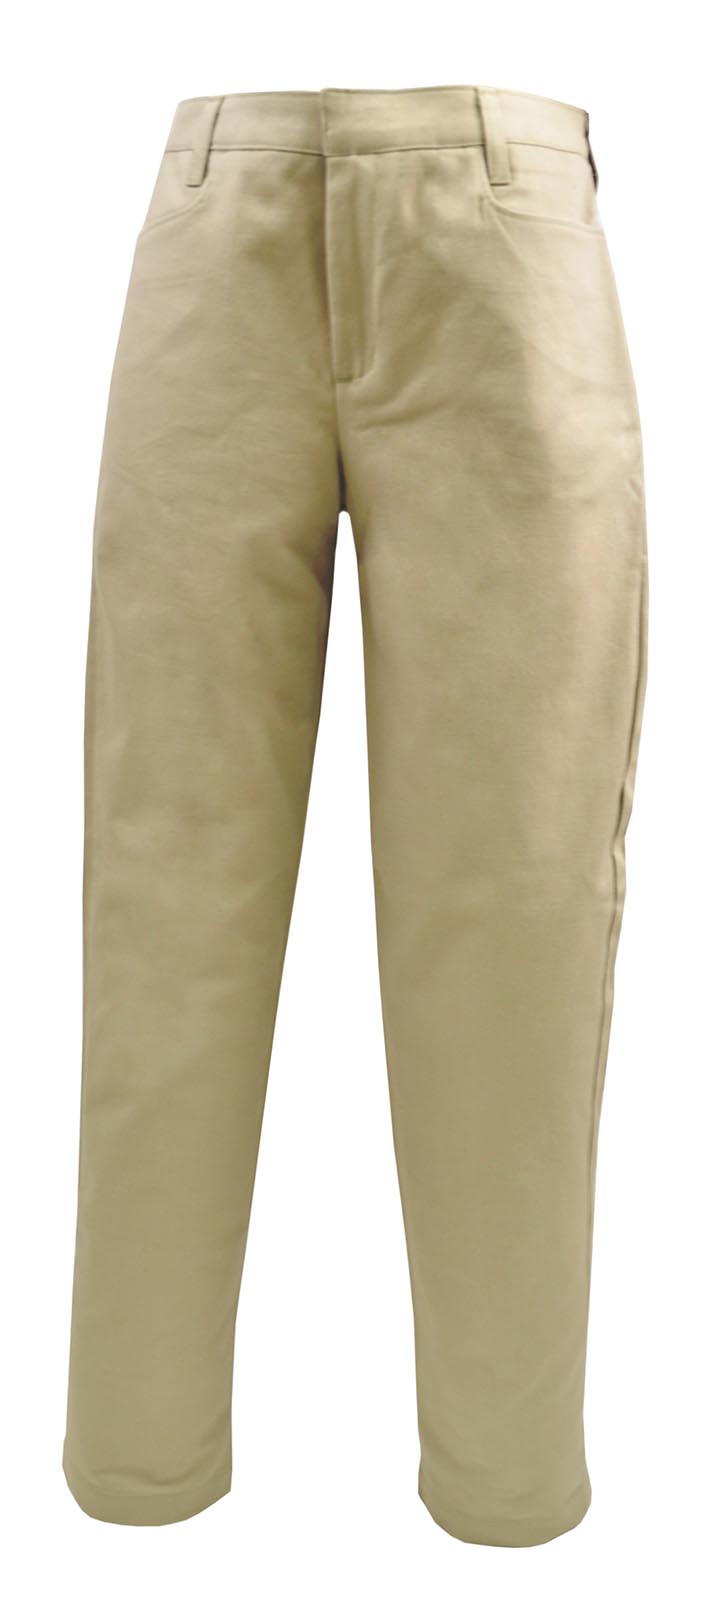 Product Image - A+ Female Mid-Rise Tapered Leg Pants 